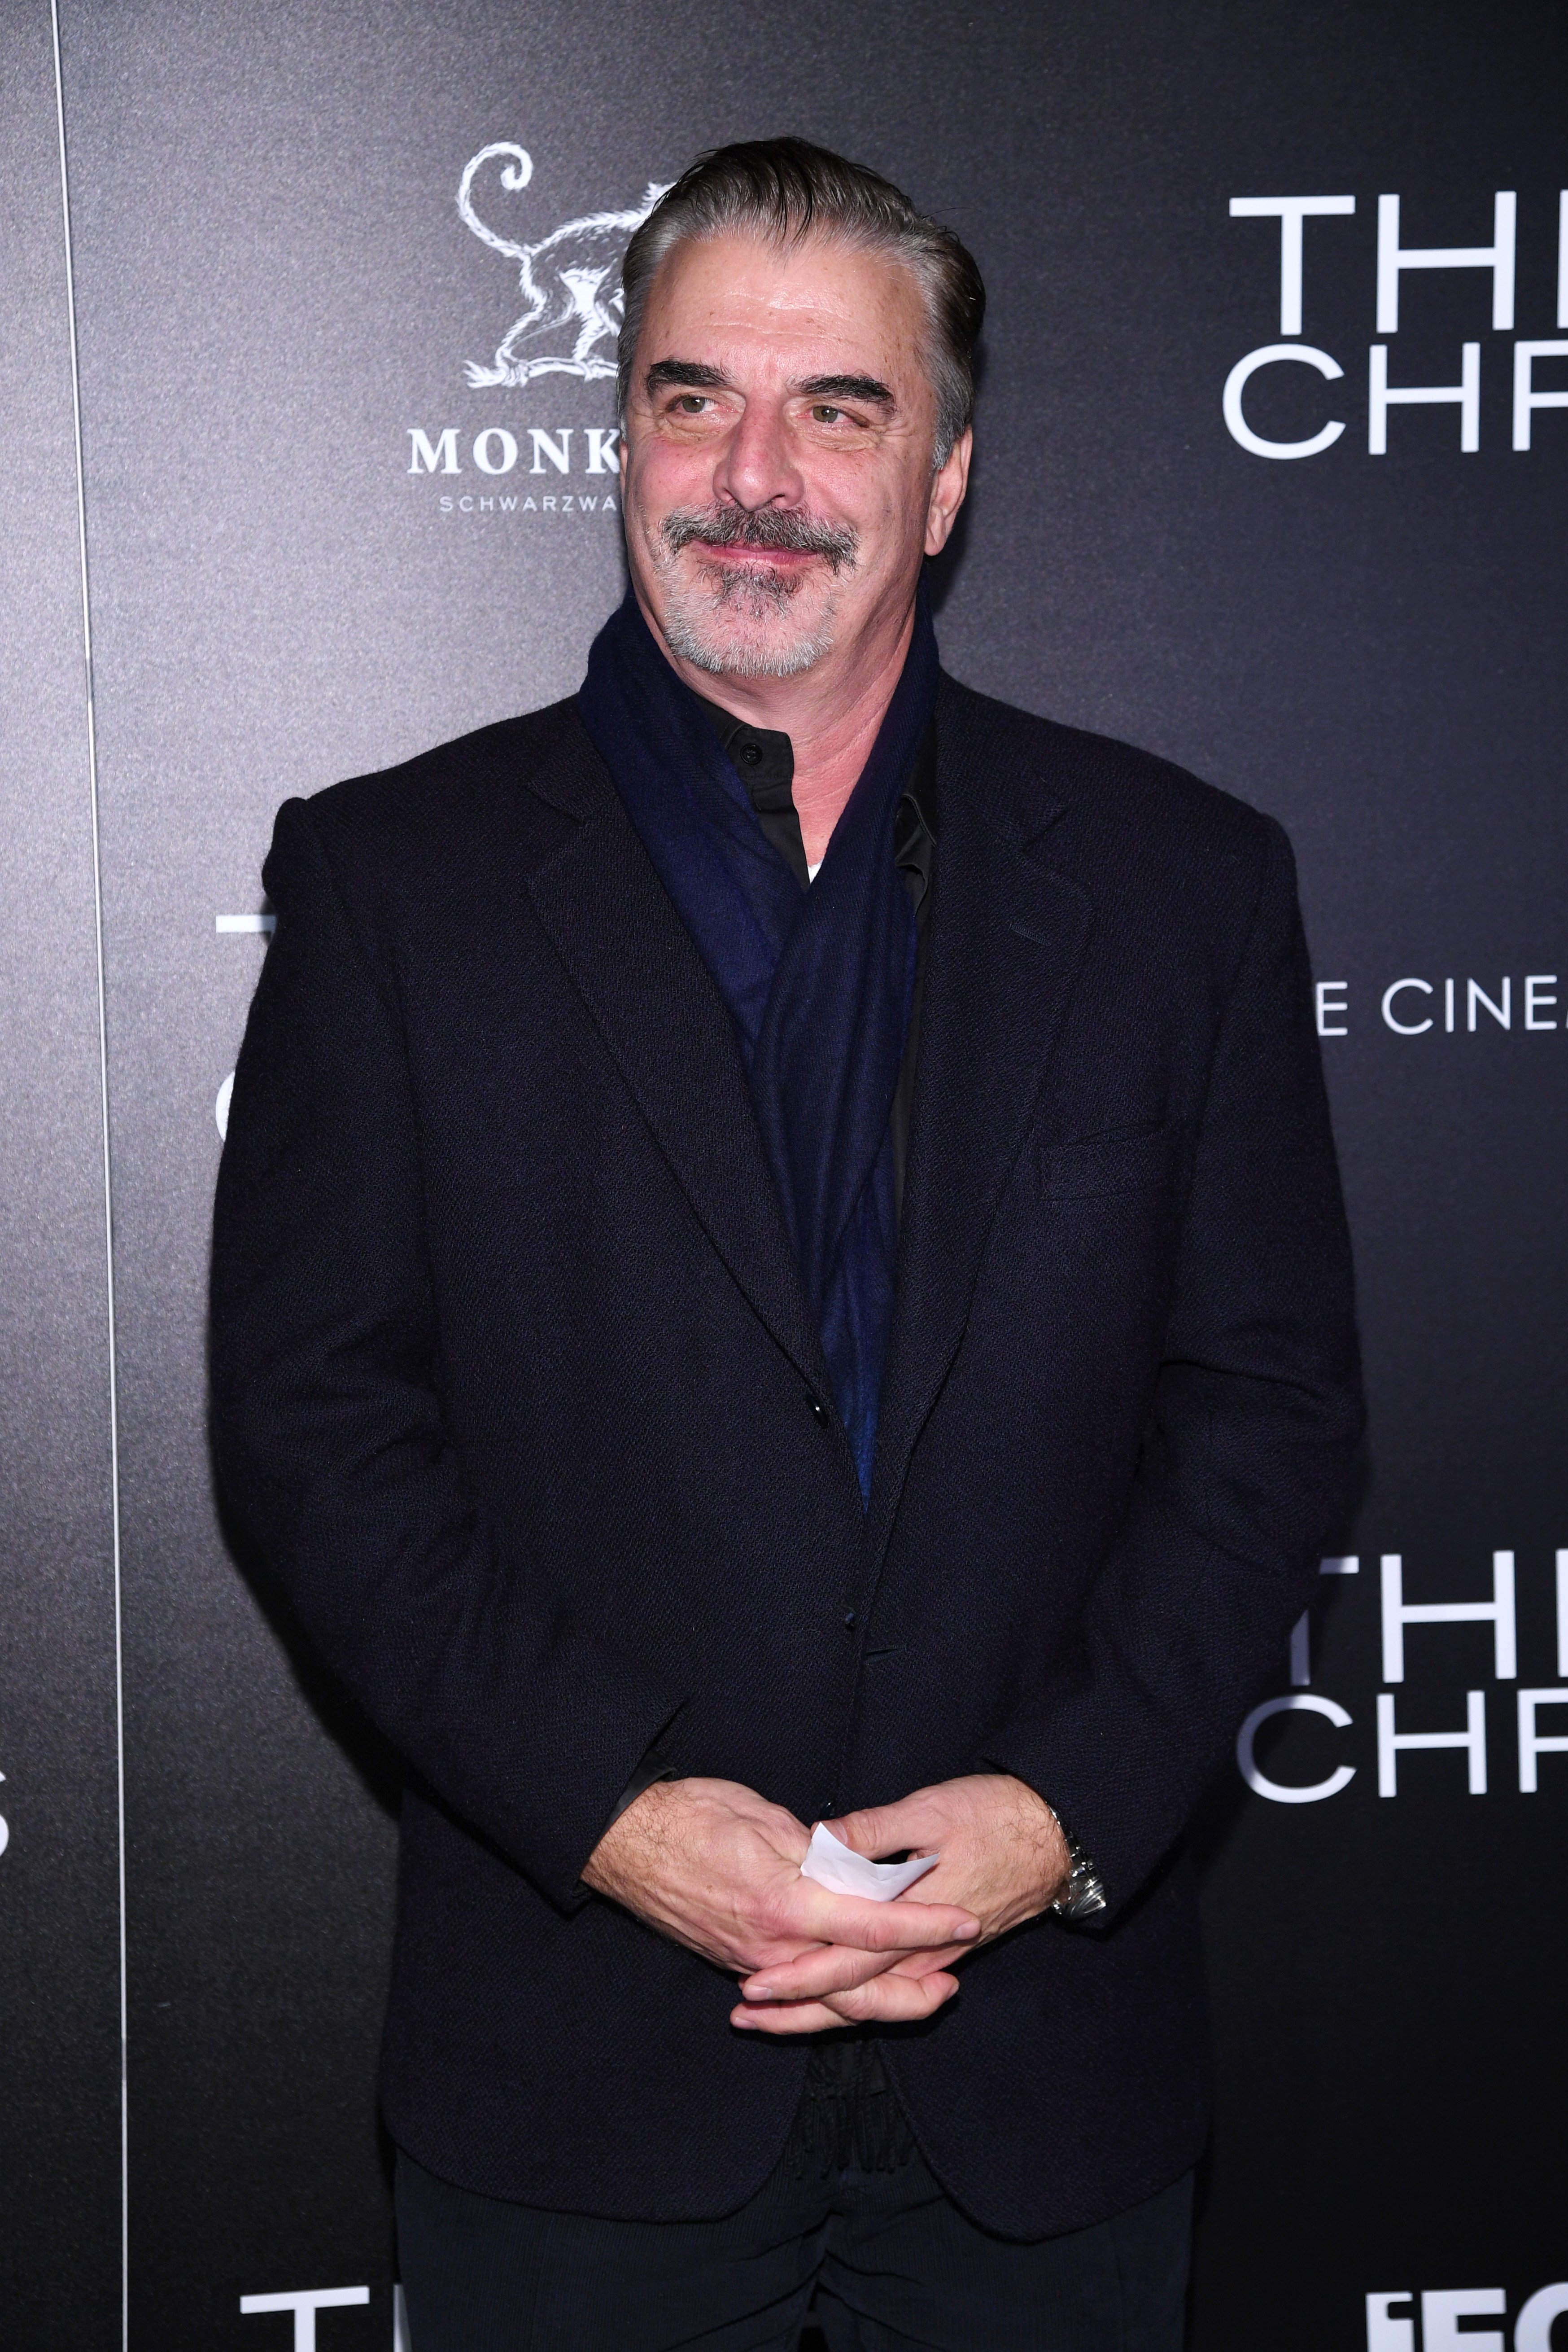 Chris Noth at the screening of "Three Christs" in New York, January, 2020. | Photo: Getty Images.